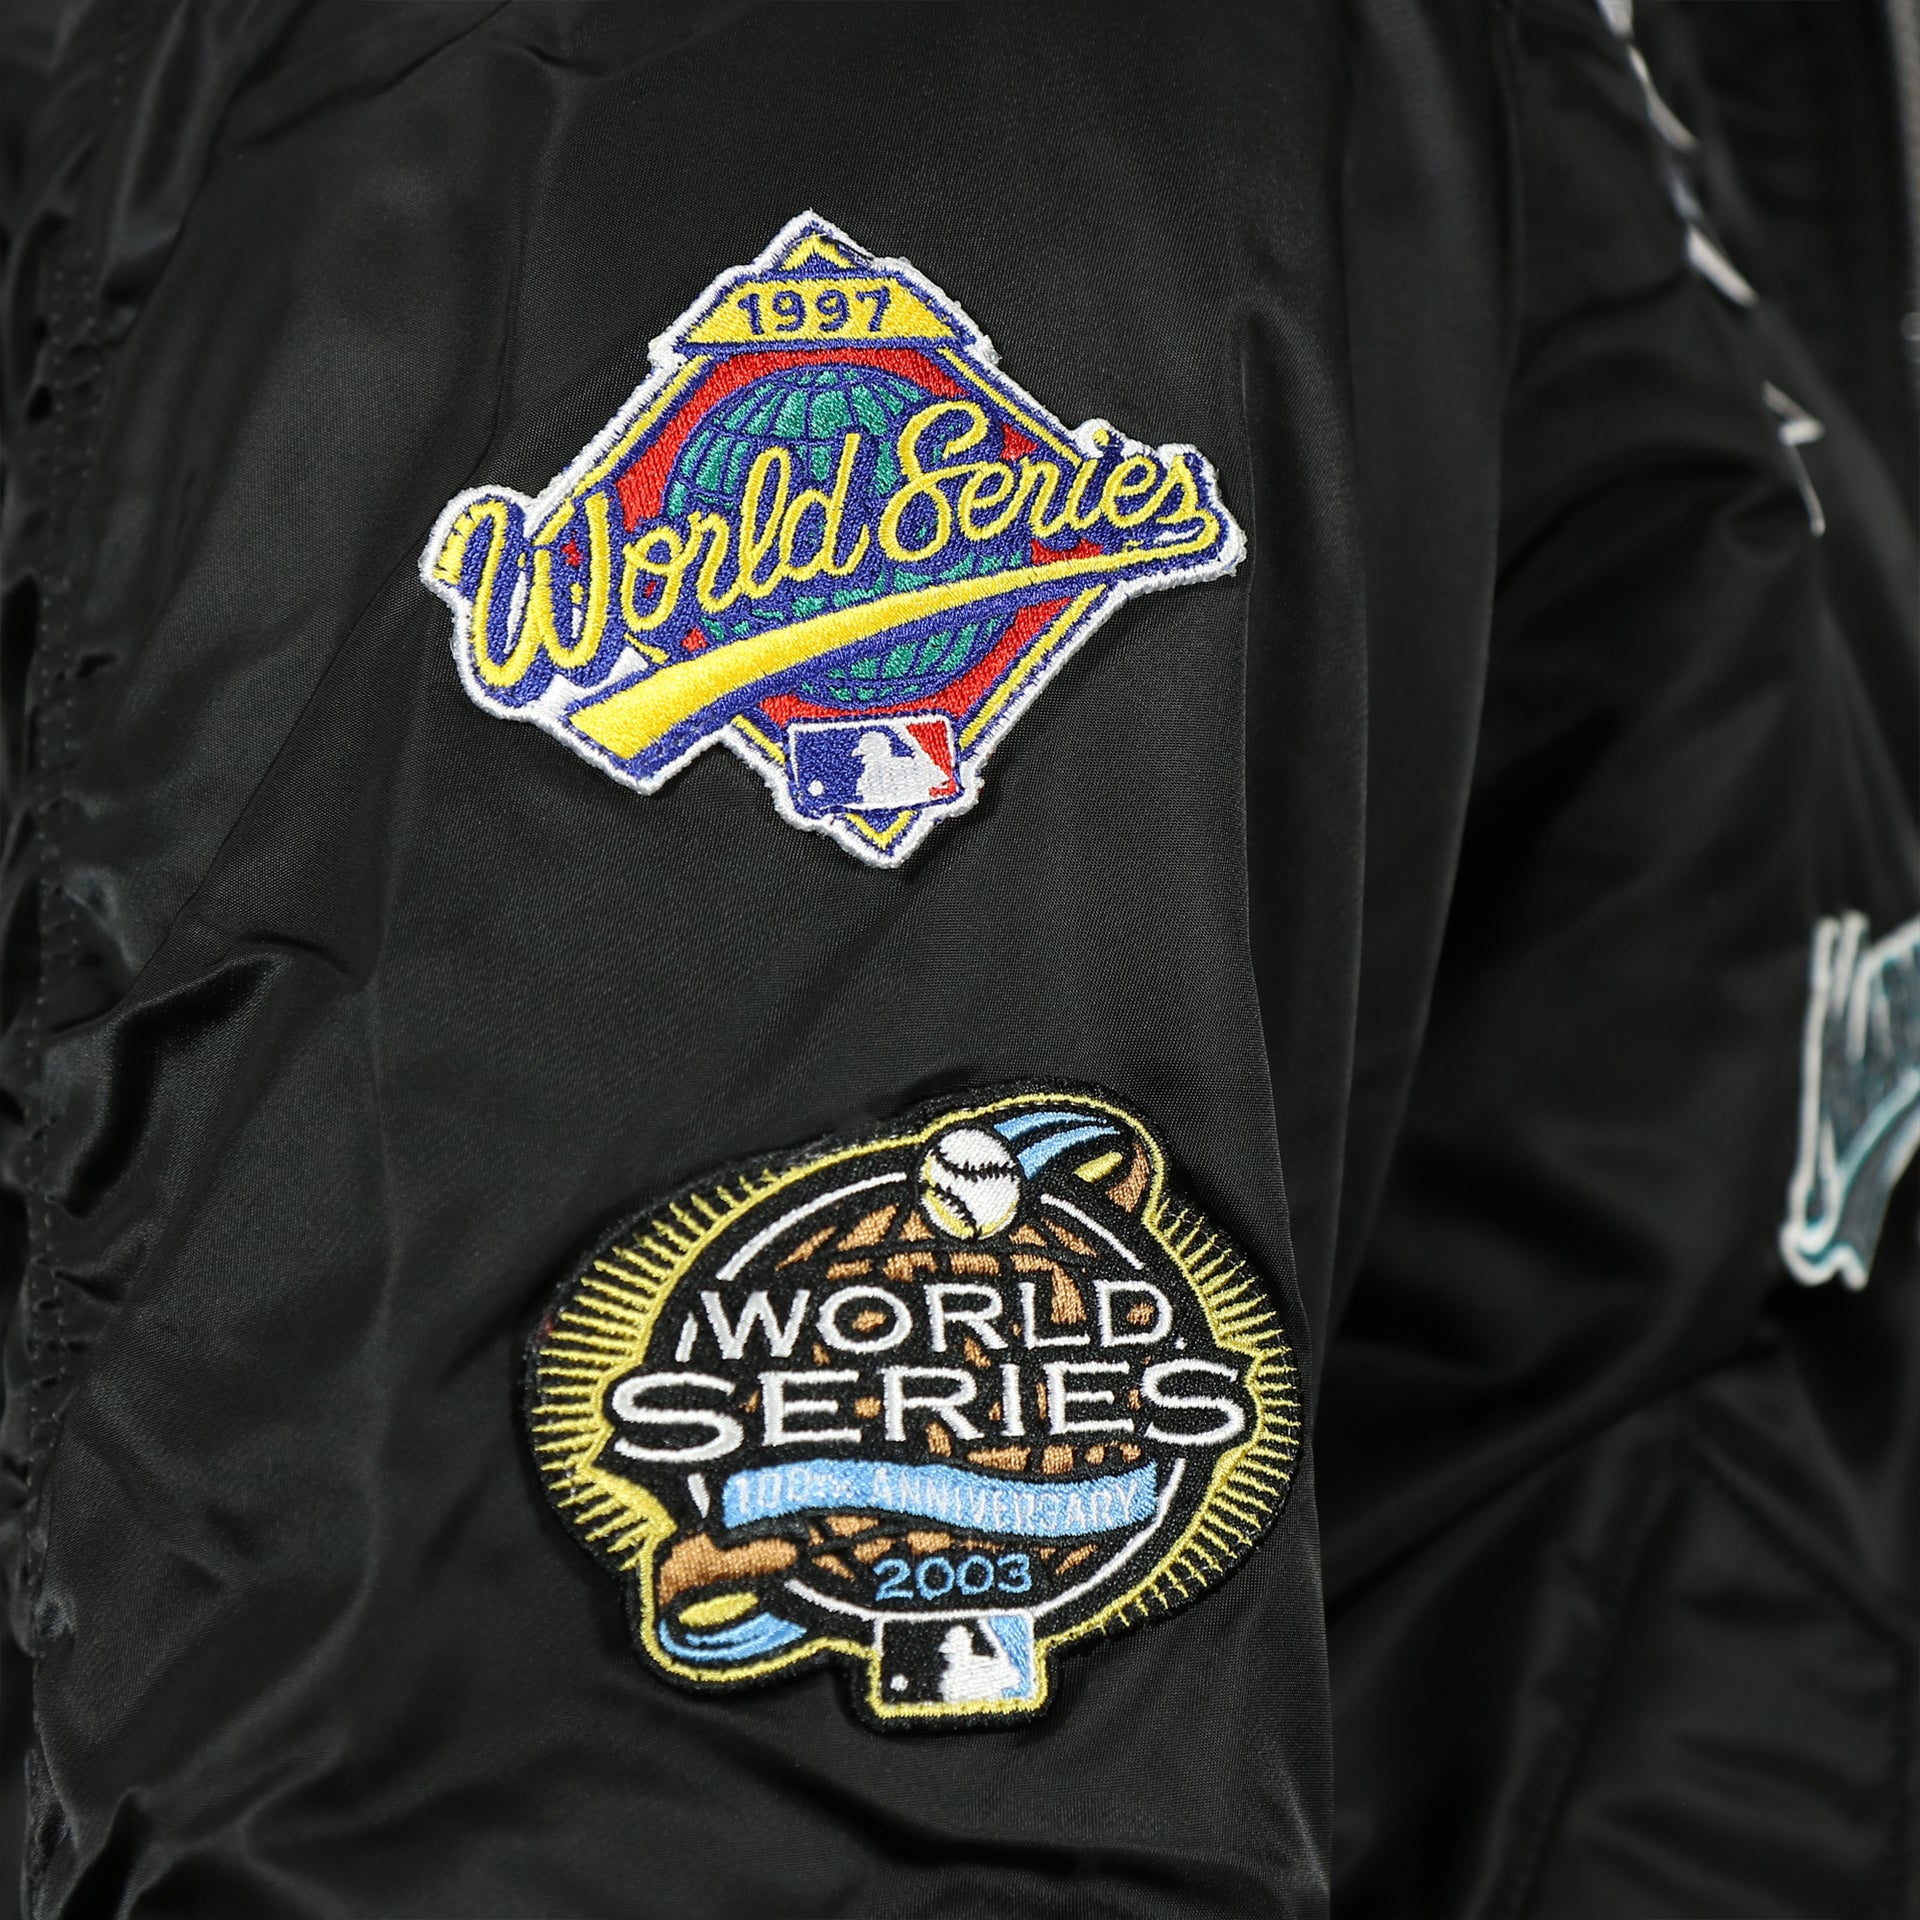 1997 and 2003 world series patches on the Florida Marlins MLB Patch Alpha Industries Reversible Bomber Jacket With Camo Liner | Black Bomber Jacket